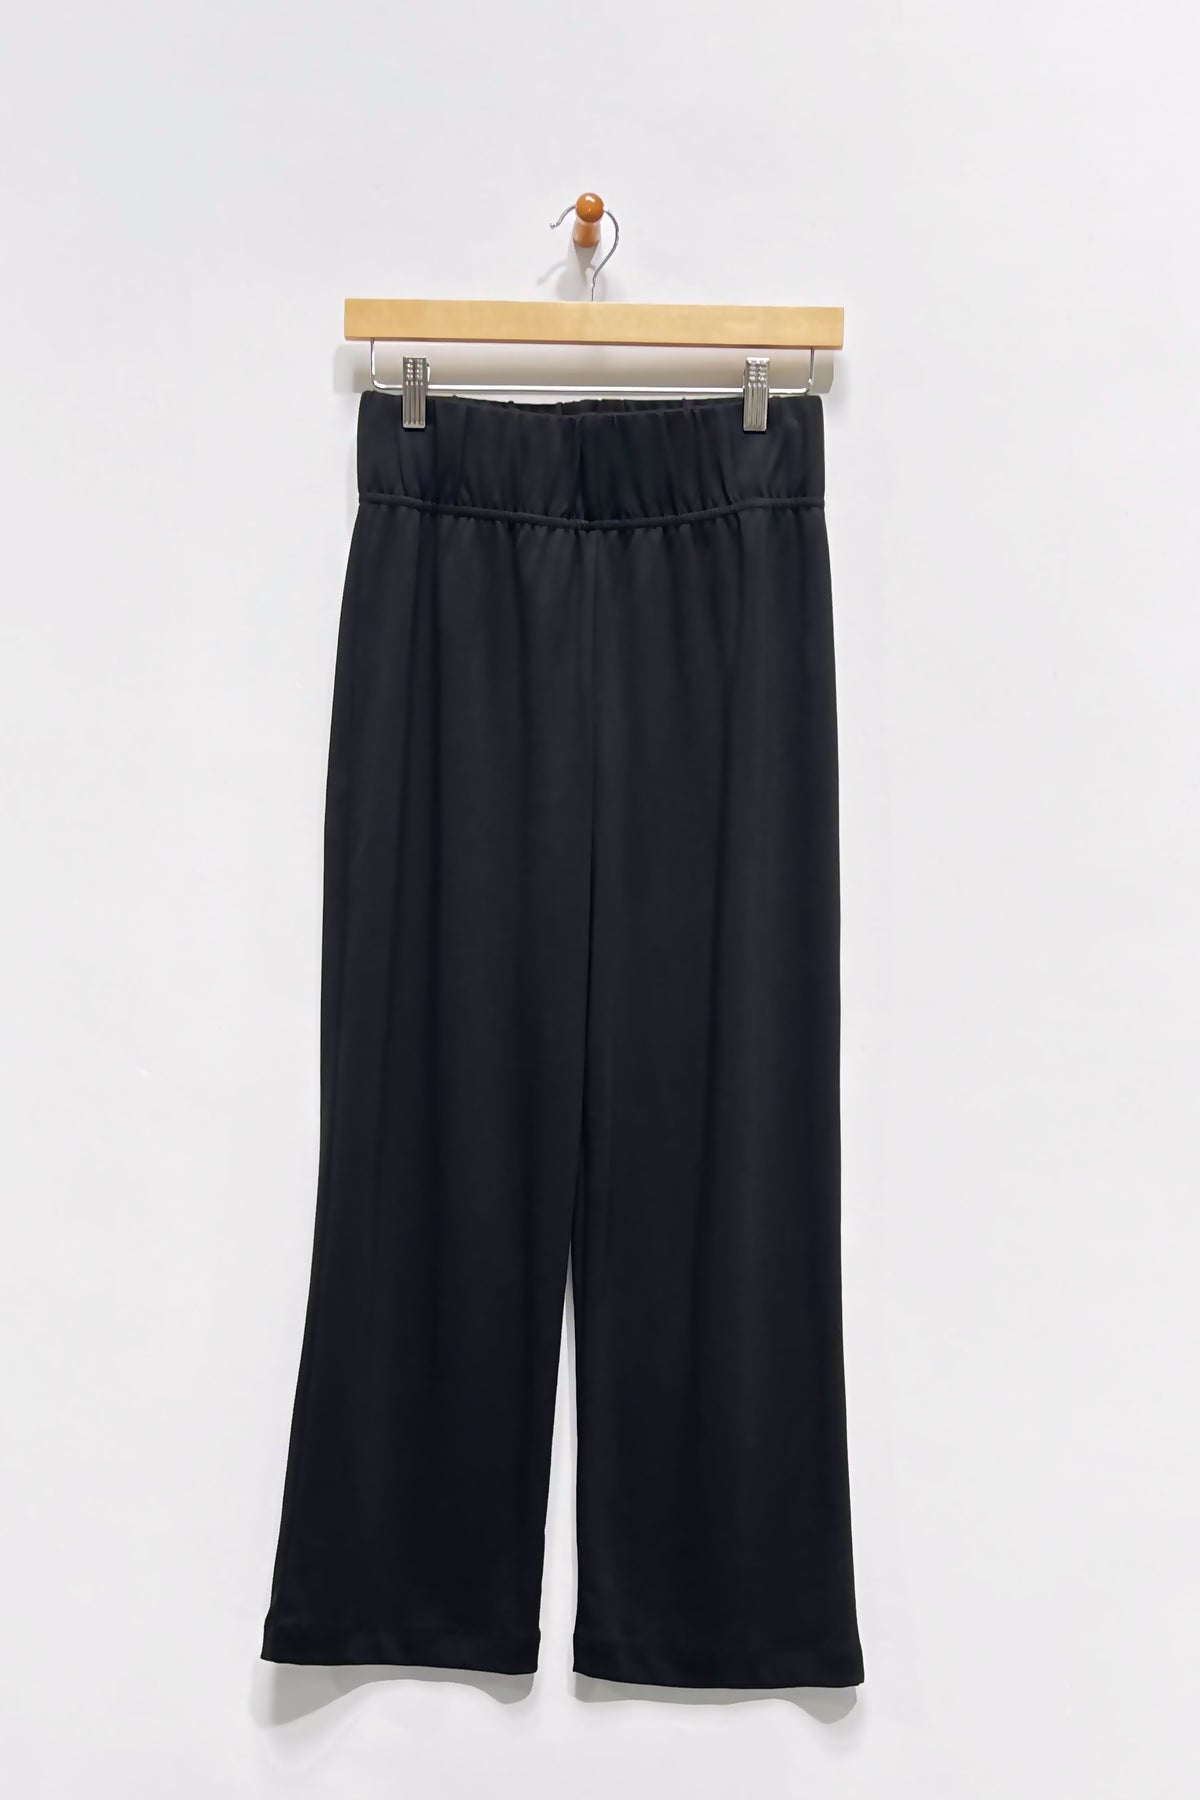 36" Pima Ankle Pants with Wide Waistband Lilli @ Home